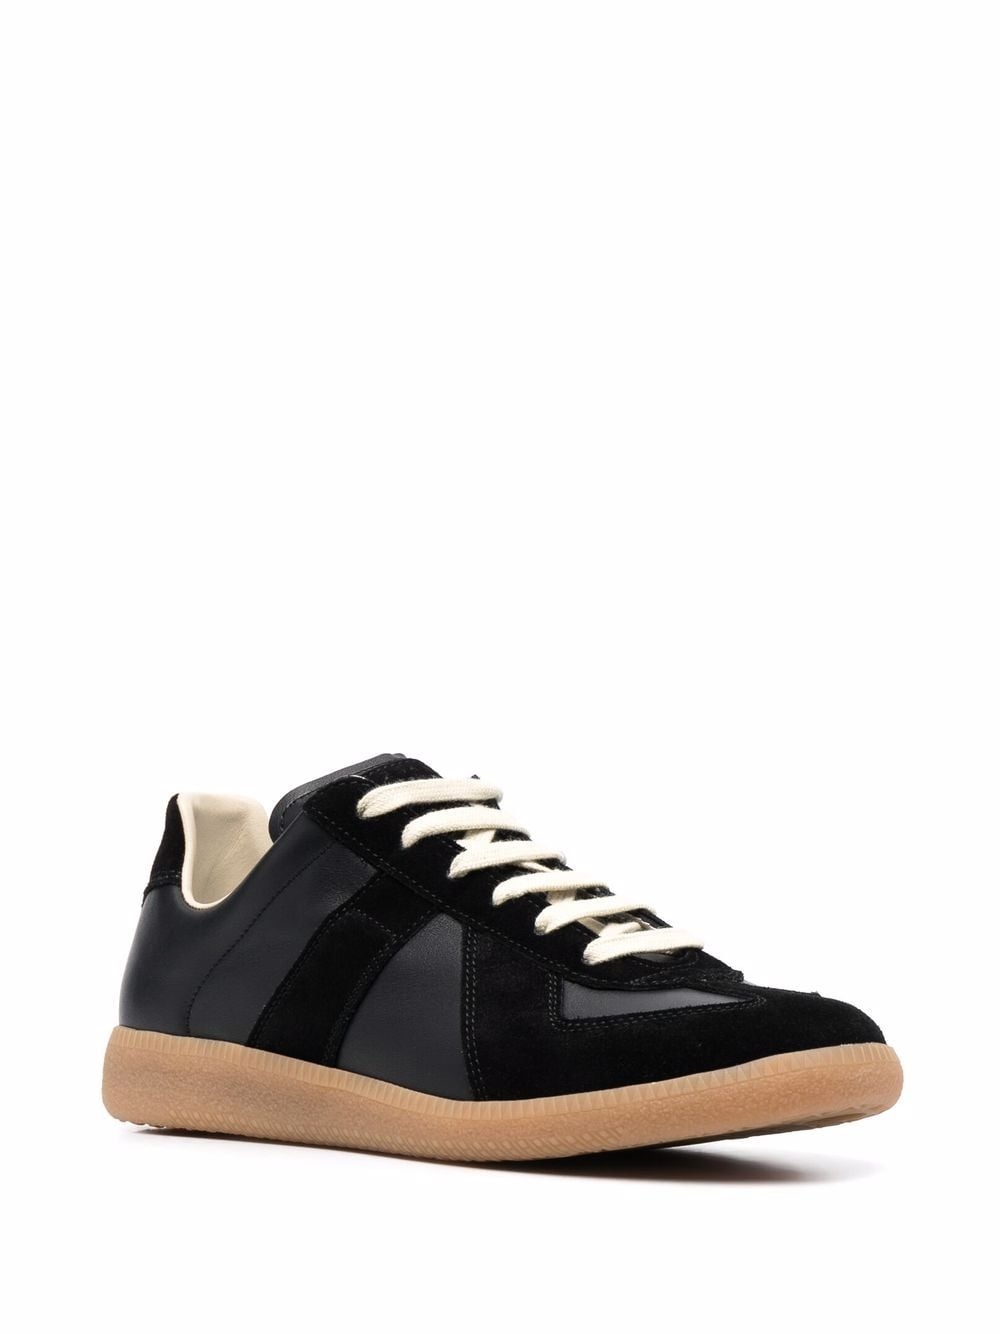 Replica leather sneakers - 2